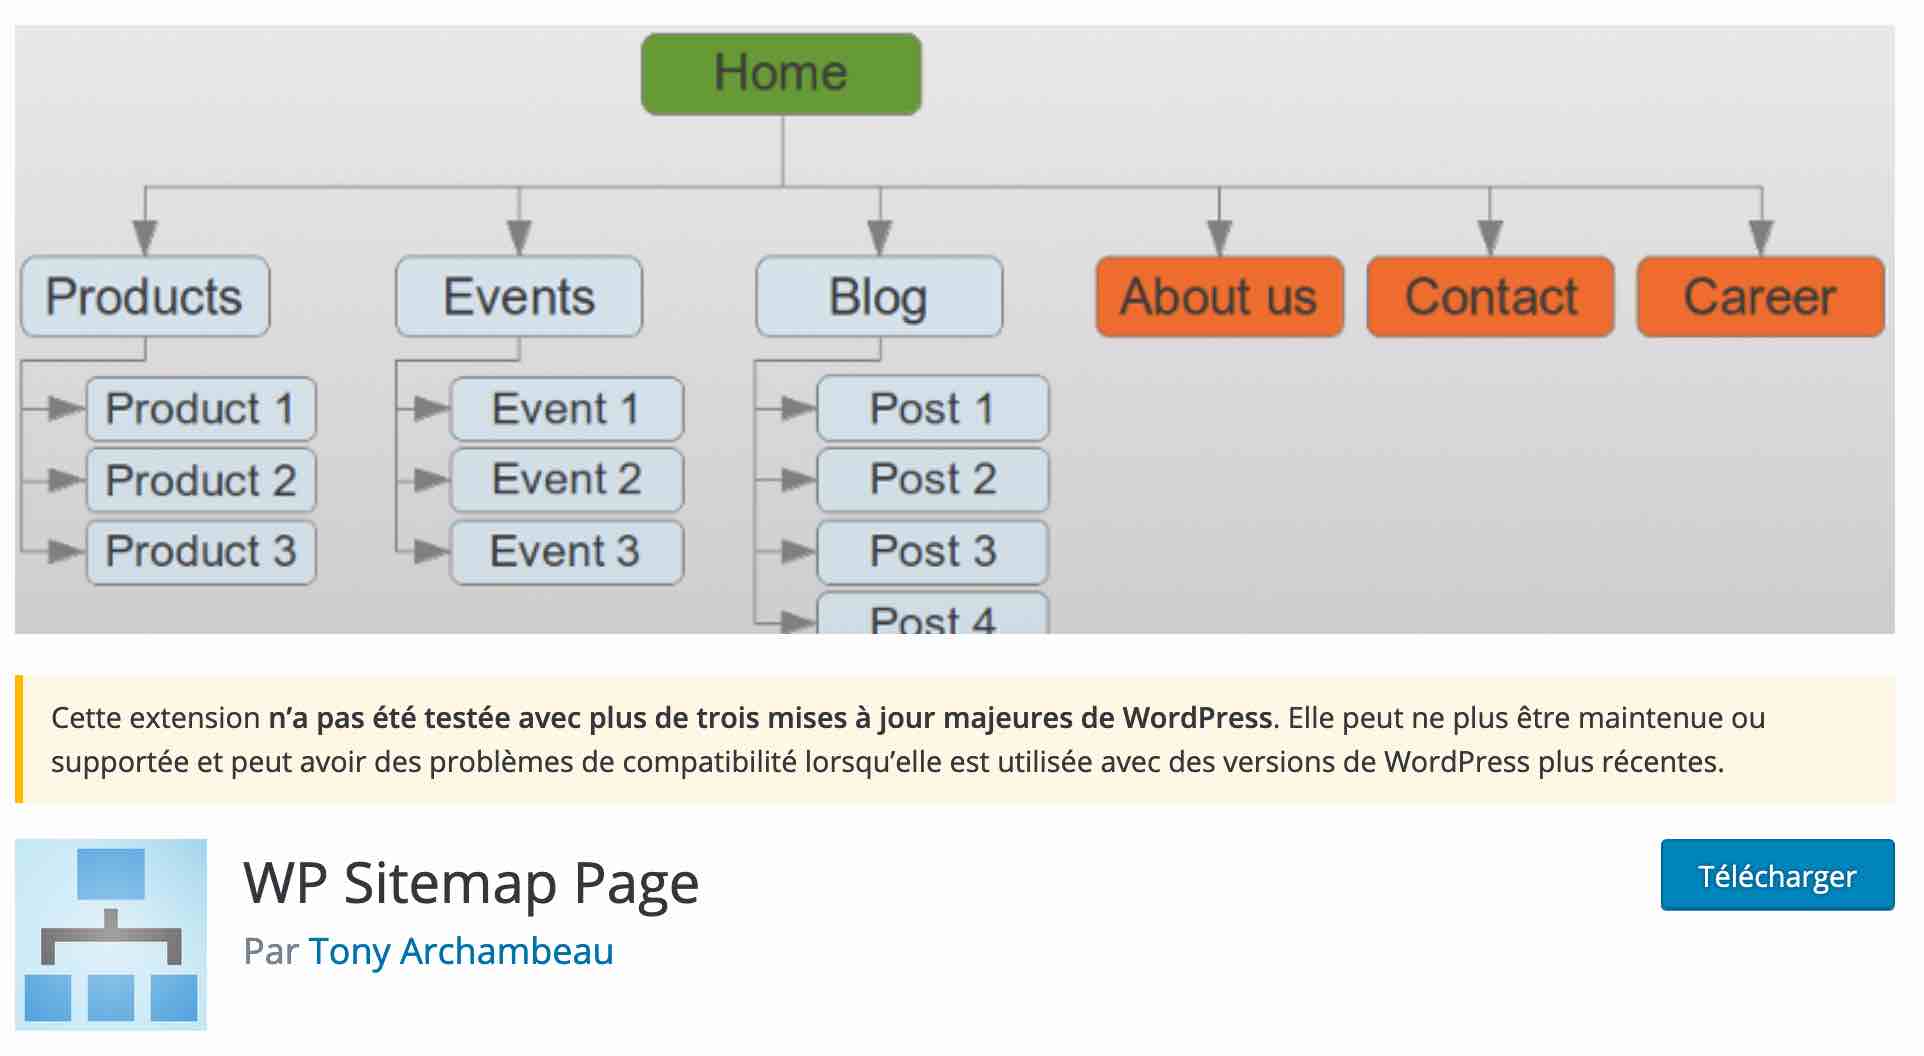 L'extension WP Sitemap Page